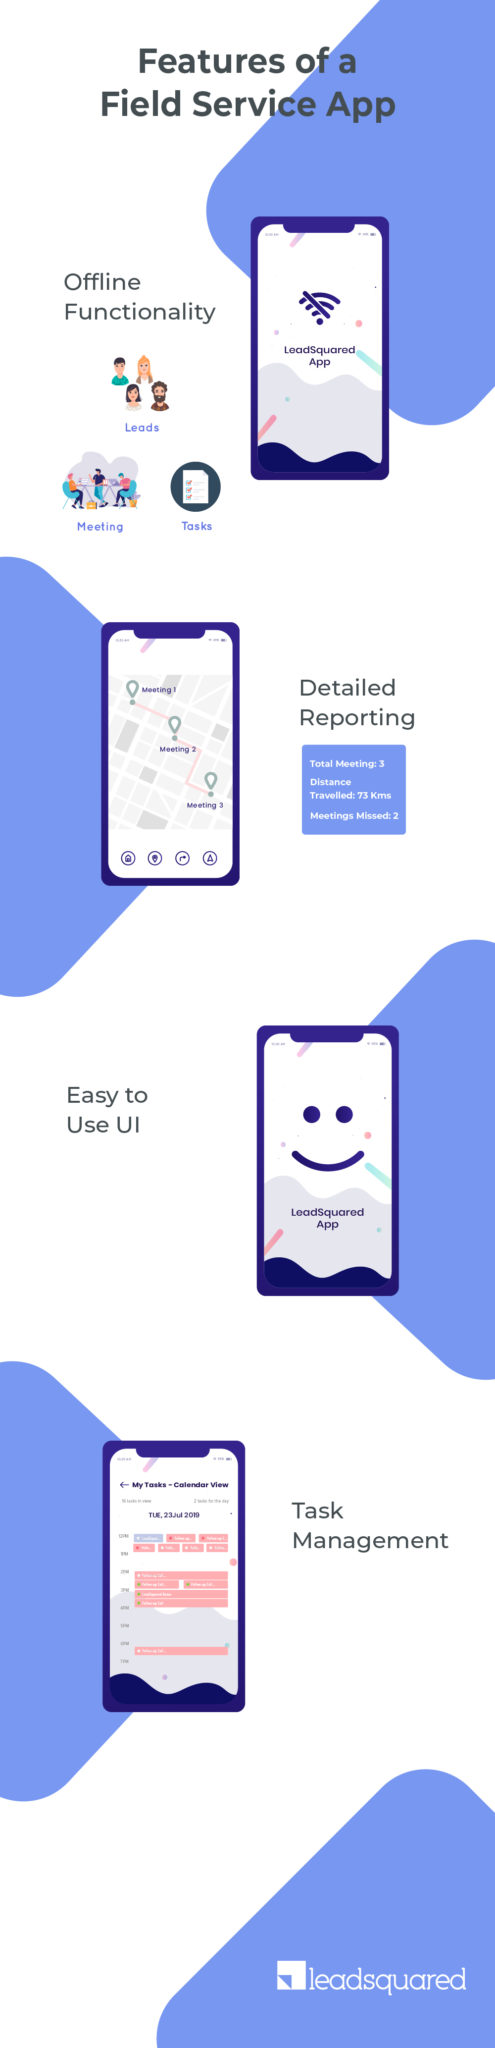 Field service app - infographic